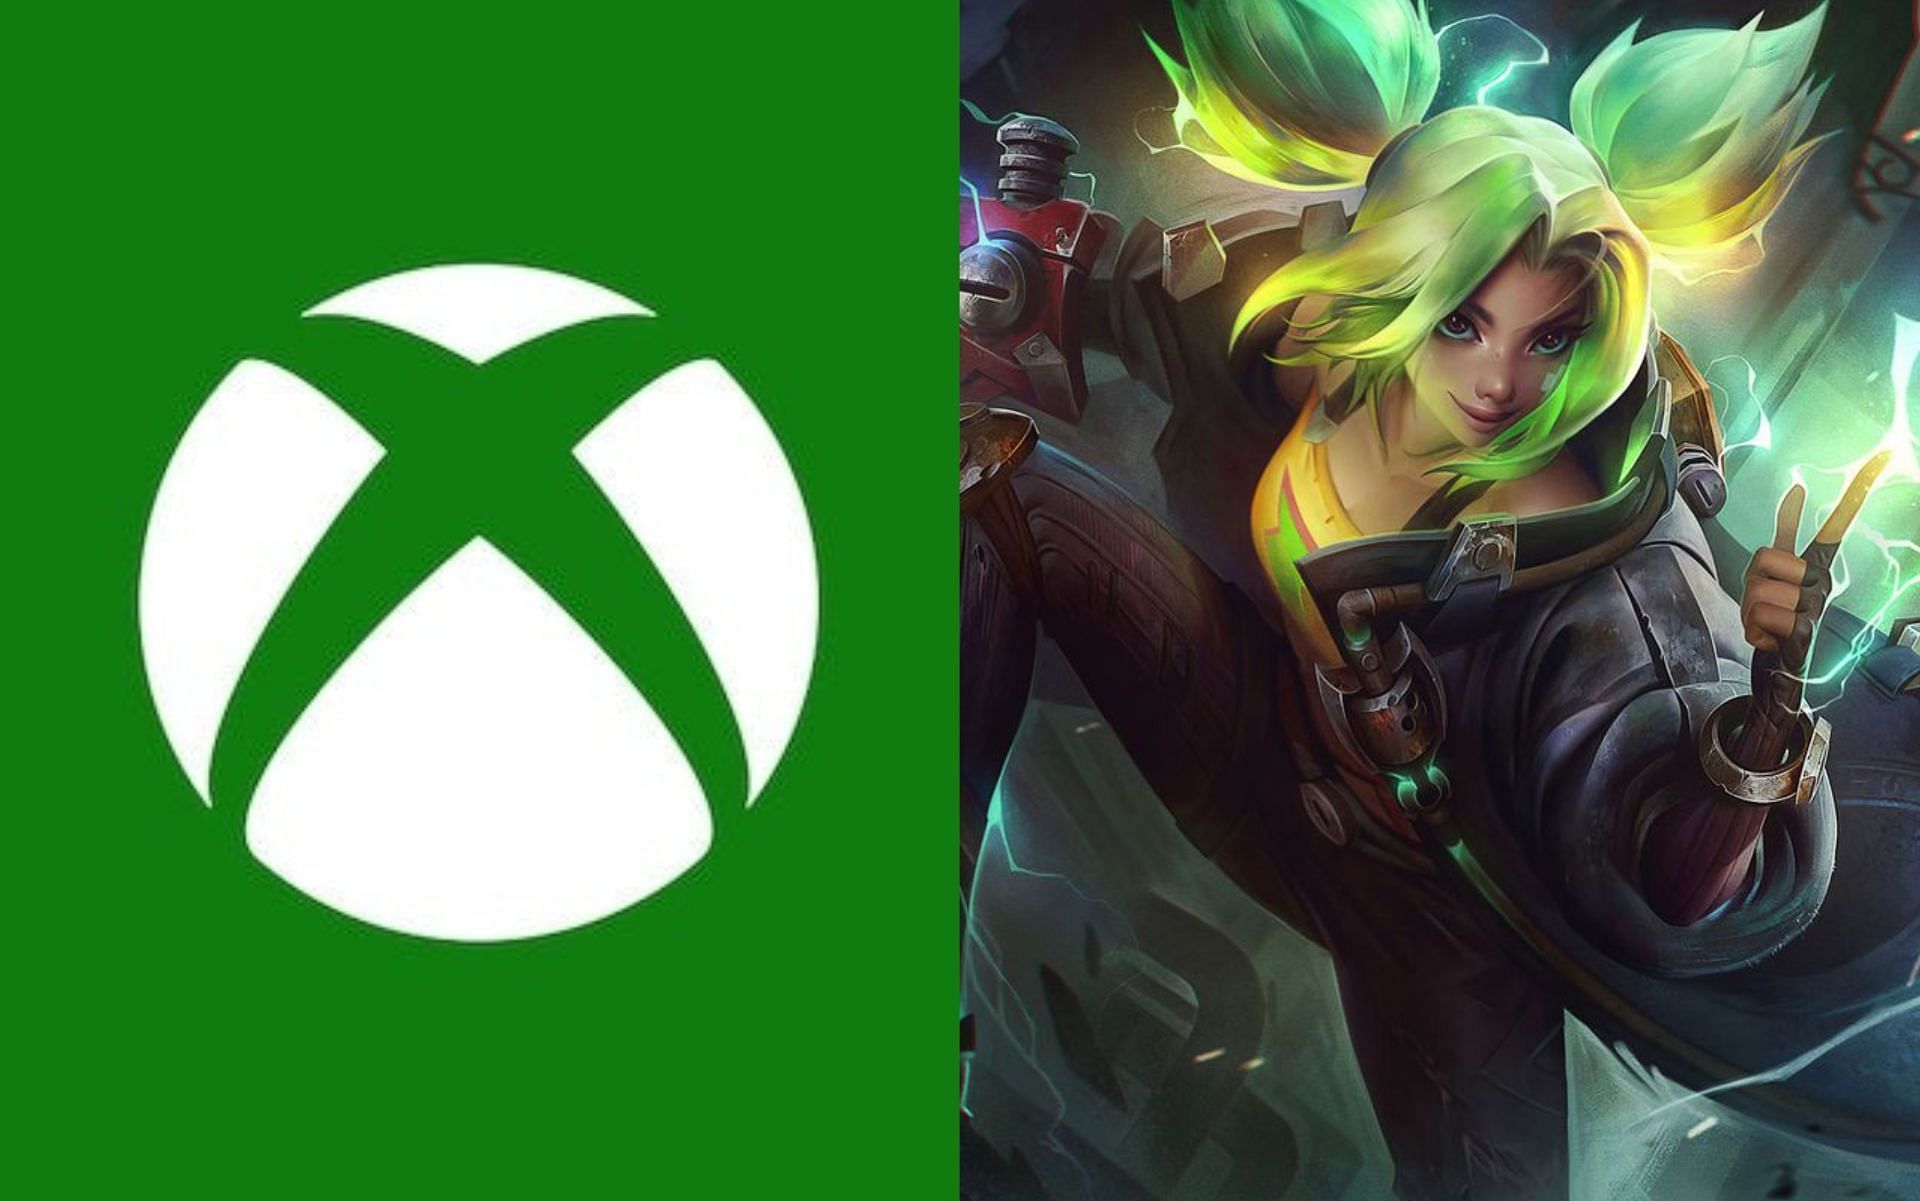 Xbox League of Legends gameplay, Achievements, Xbox clips, Gifs